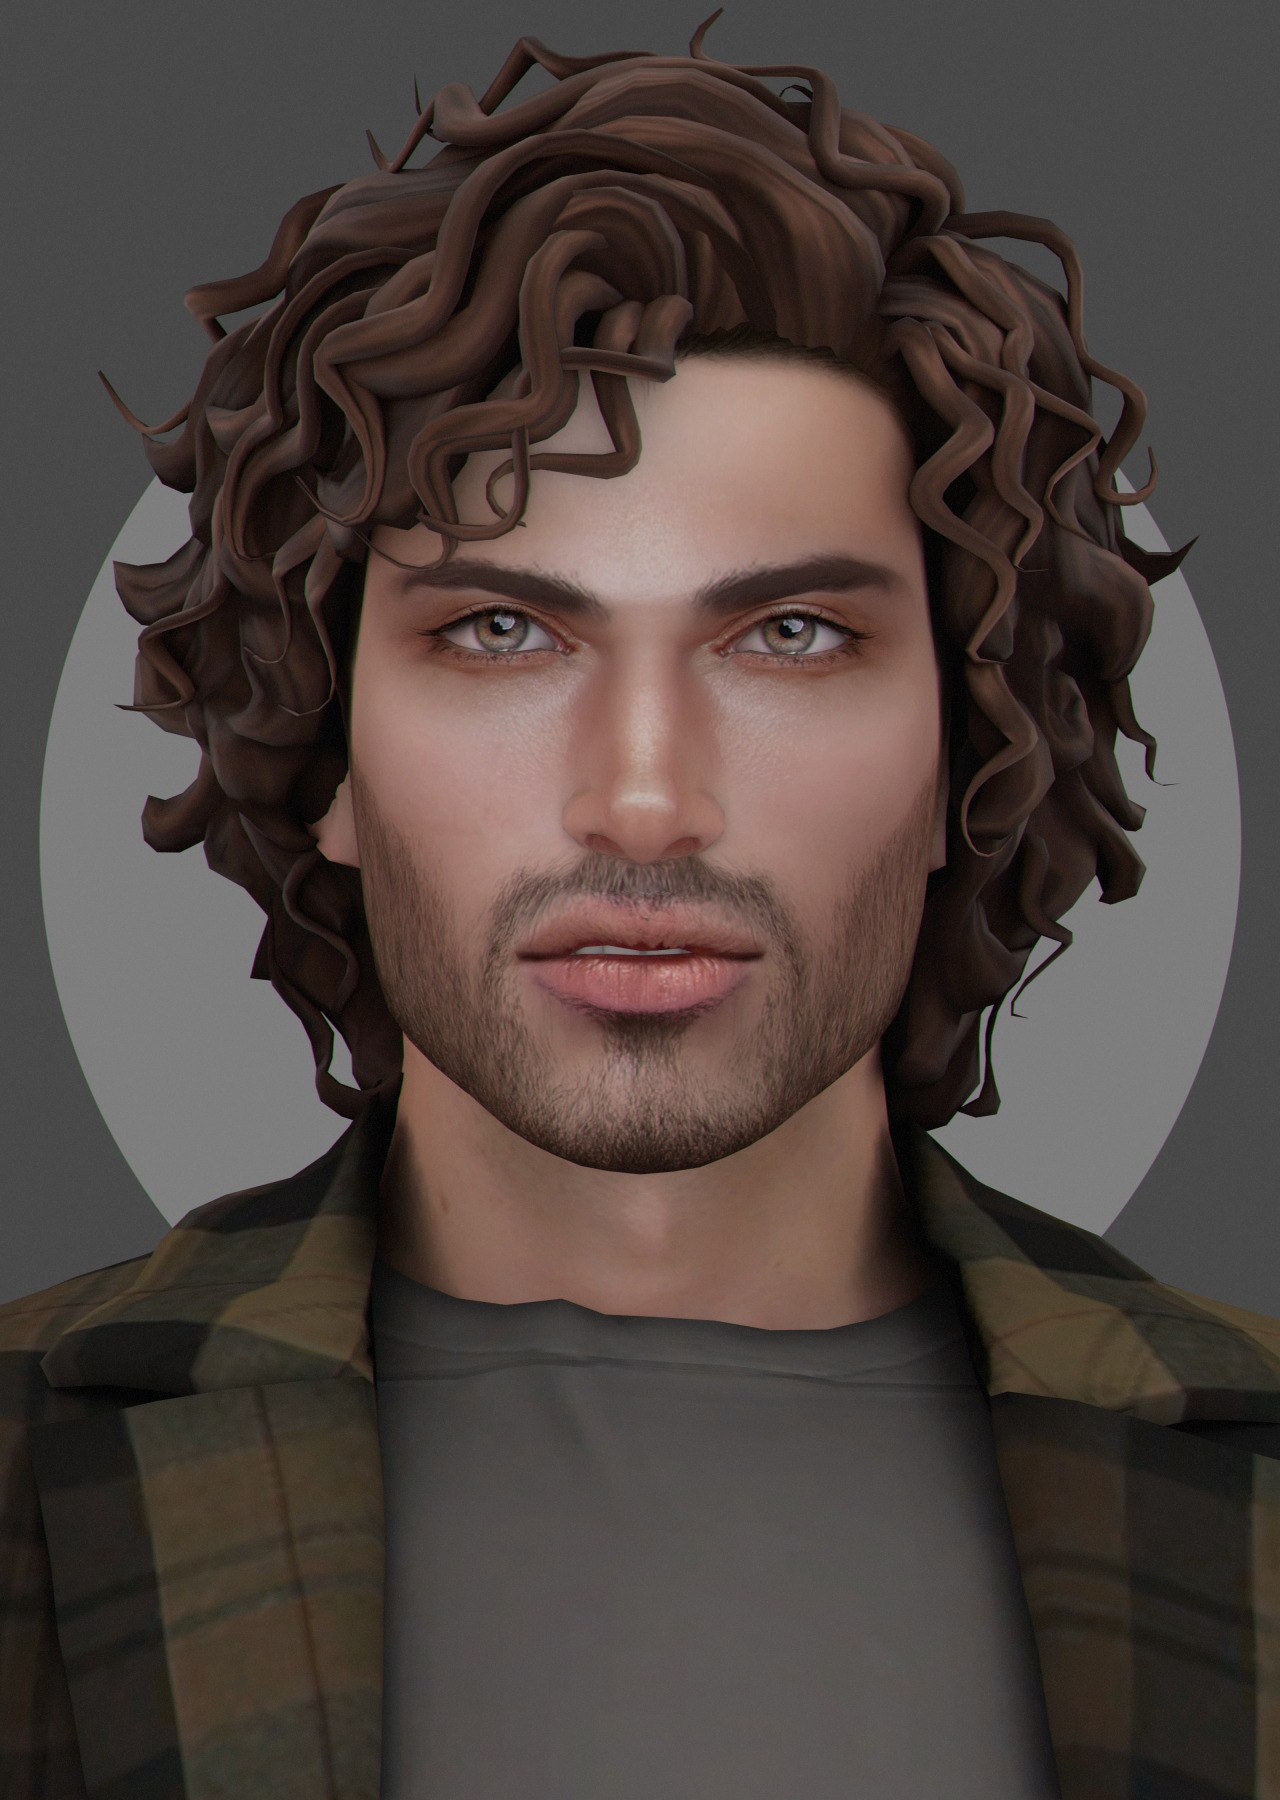 90s Male Hair Wistful Castle On Patreon In 2021 Sims 4 Hair Male Sims 4